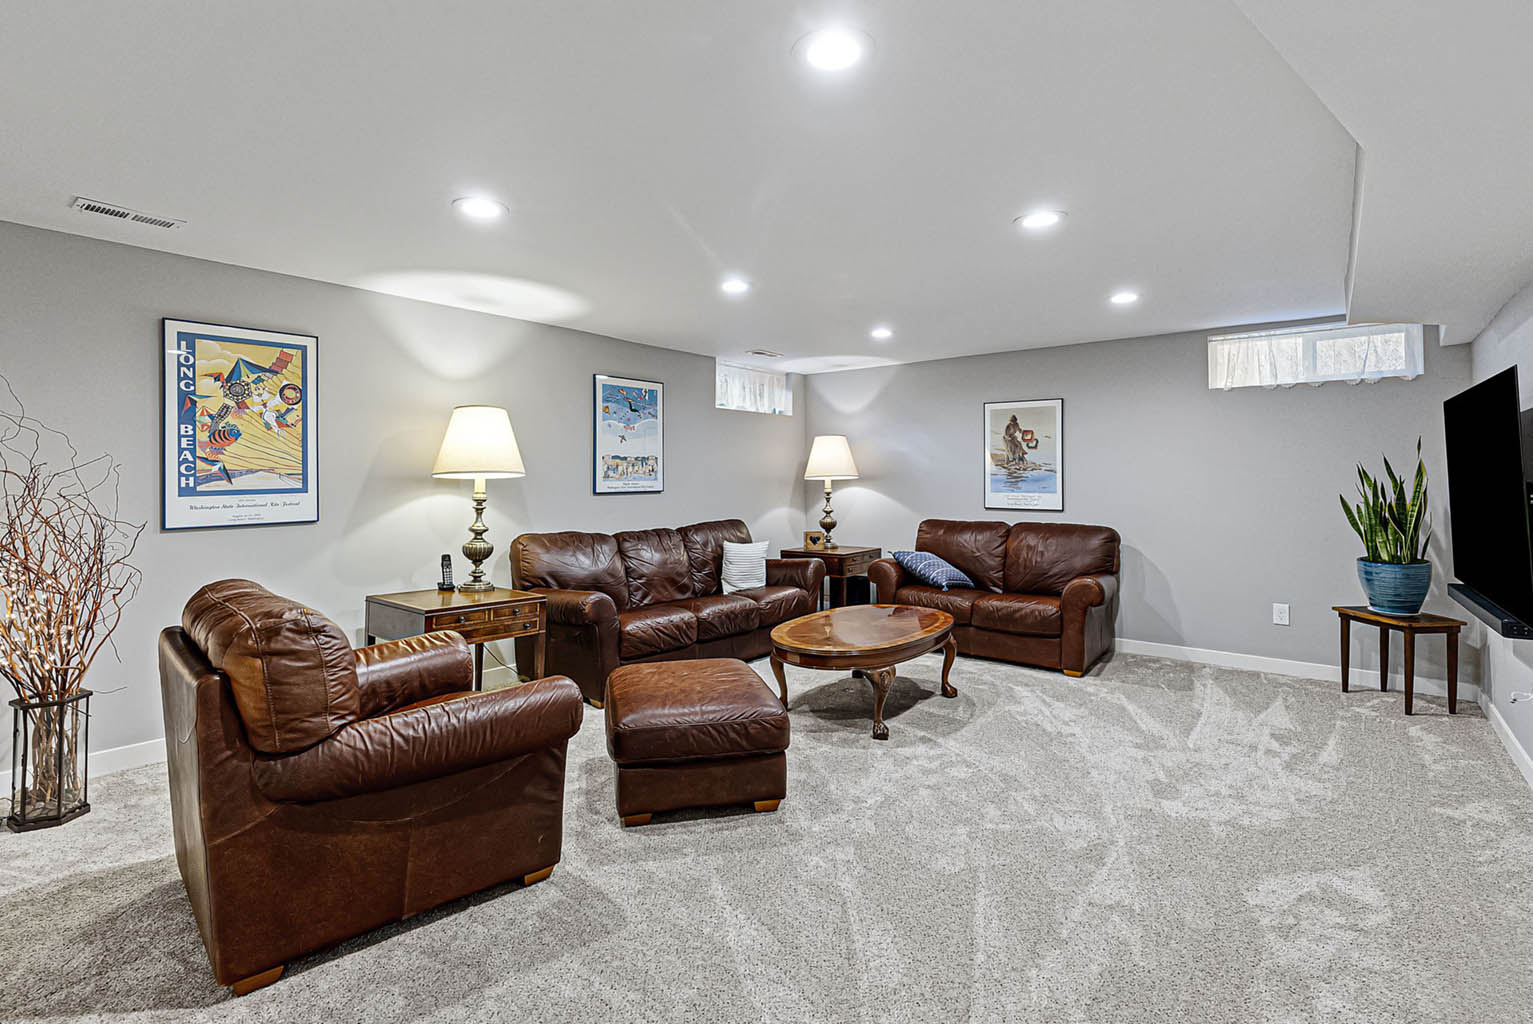 Spacious family room on the lower level